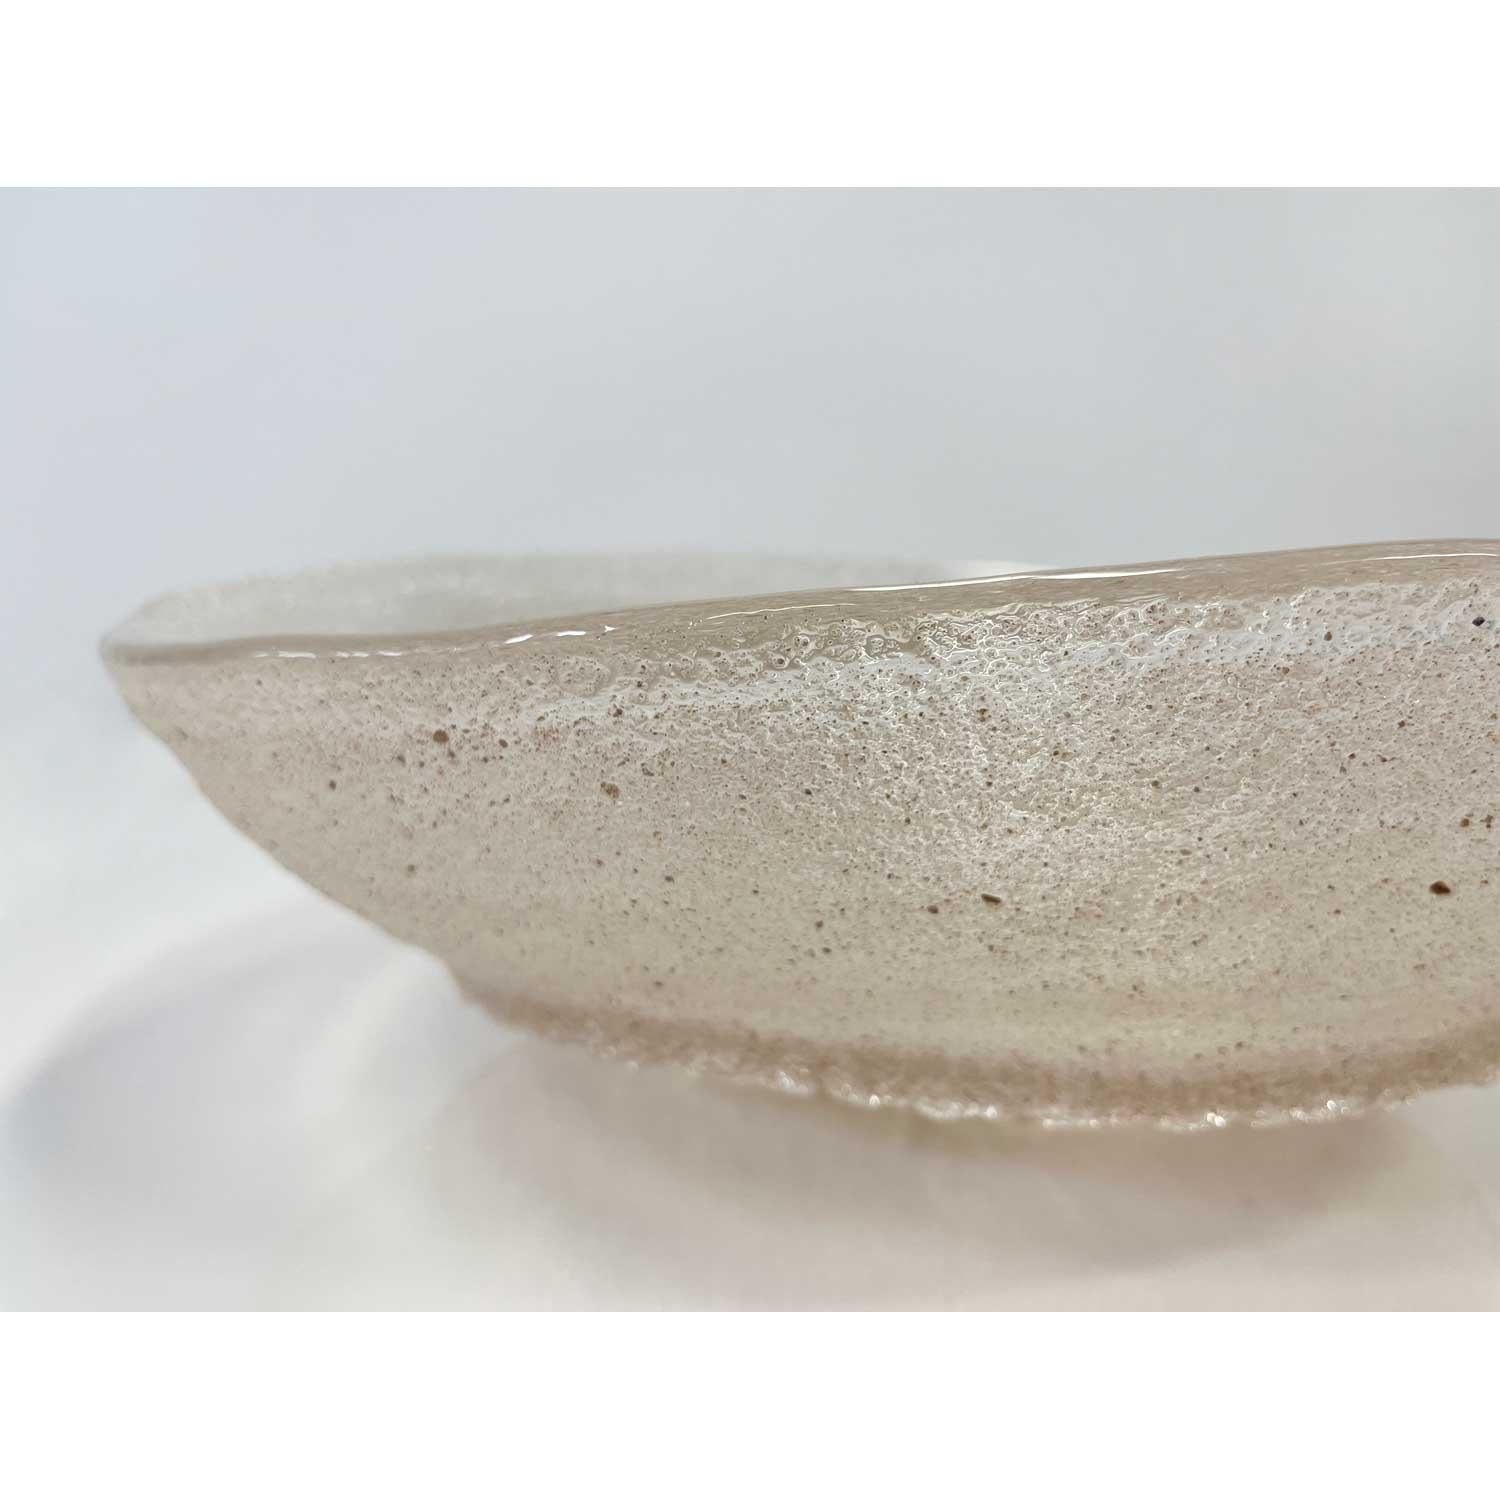 Andrew Beauchamp is a Canadian glass artist and technician. He has worked as a teaching assistant, a production glassblower, a gallery installer and as an assistant to many well-known Canadian glass artists.
 
His series of sandcast bowls were